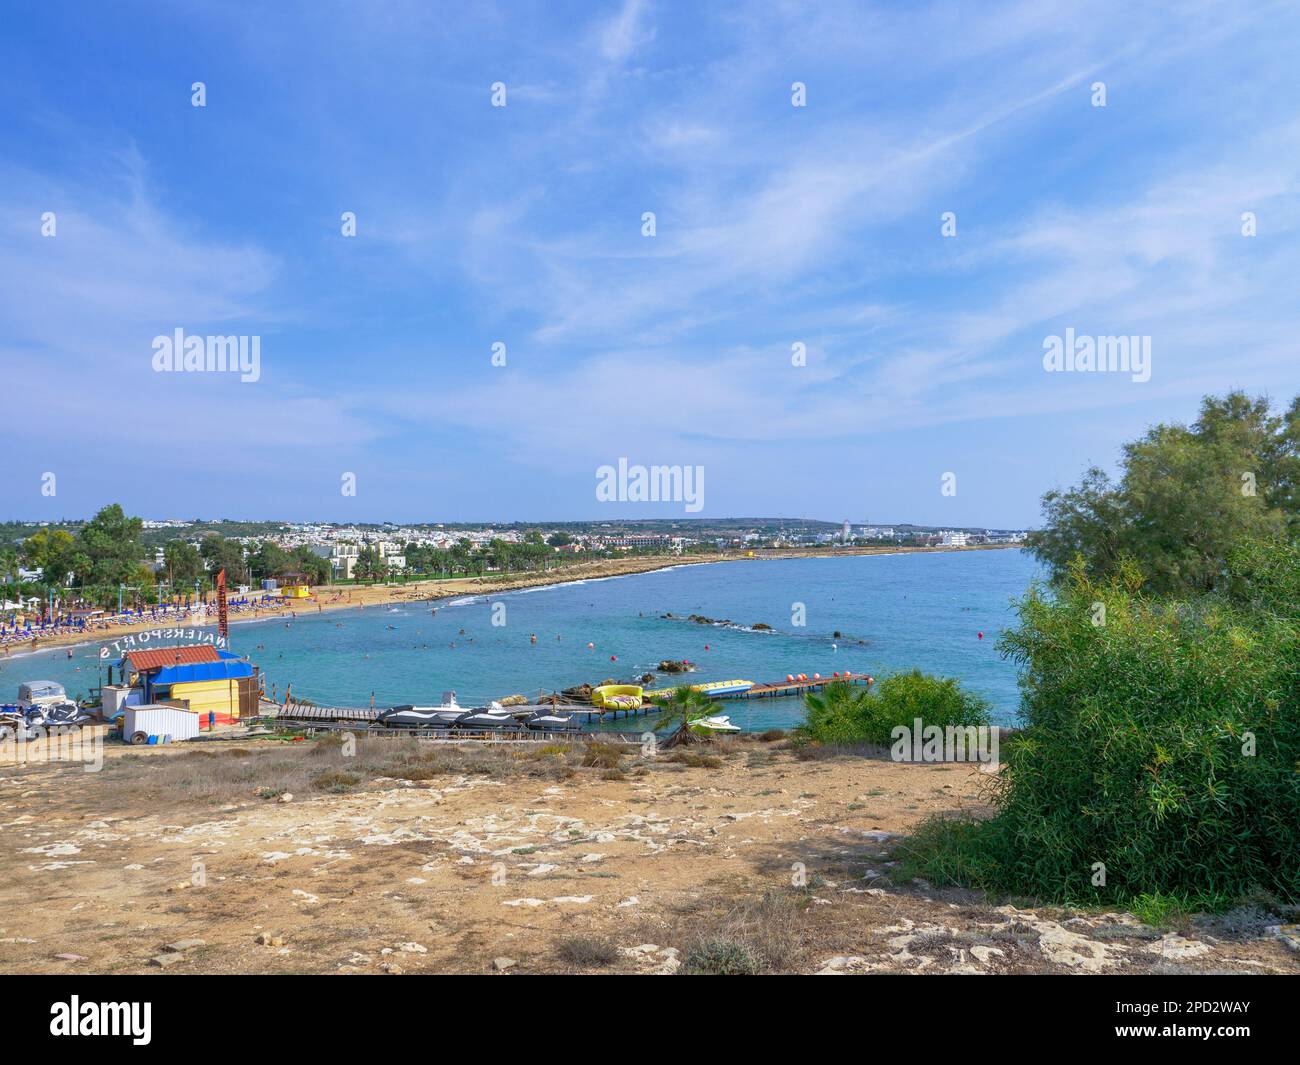 Water sports station with powerboats and water scooters near ponton going from high shore into the mediterranean sea in Ayia Napa, Cyprus. Stock Photo